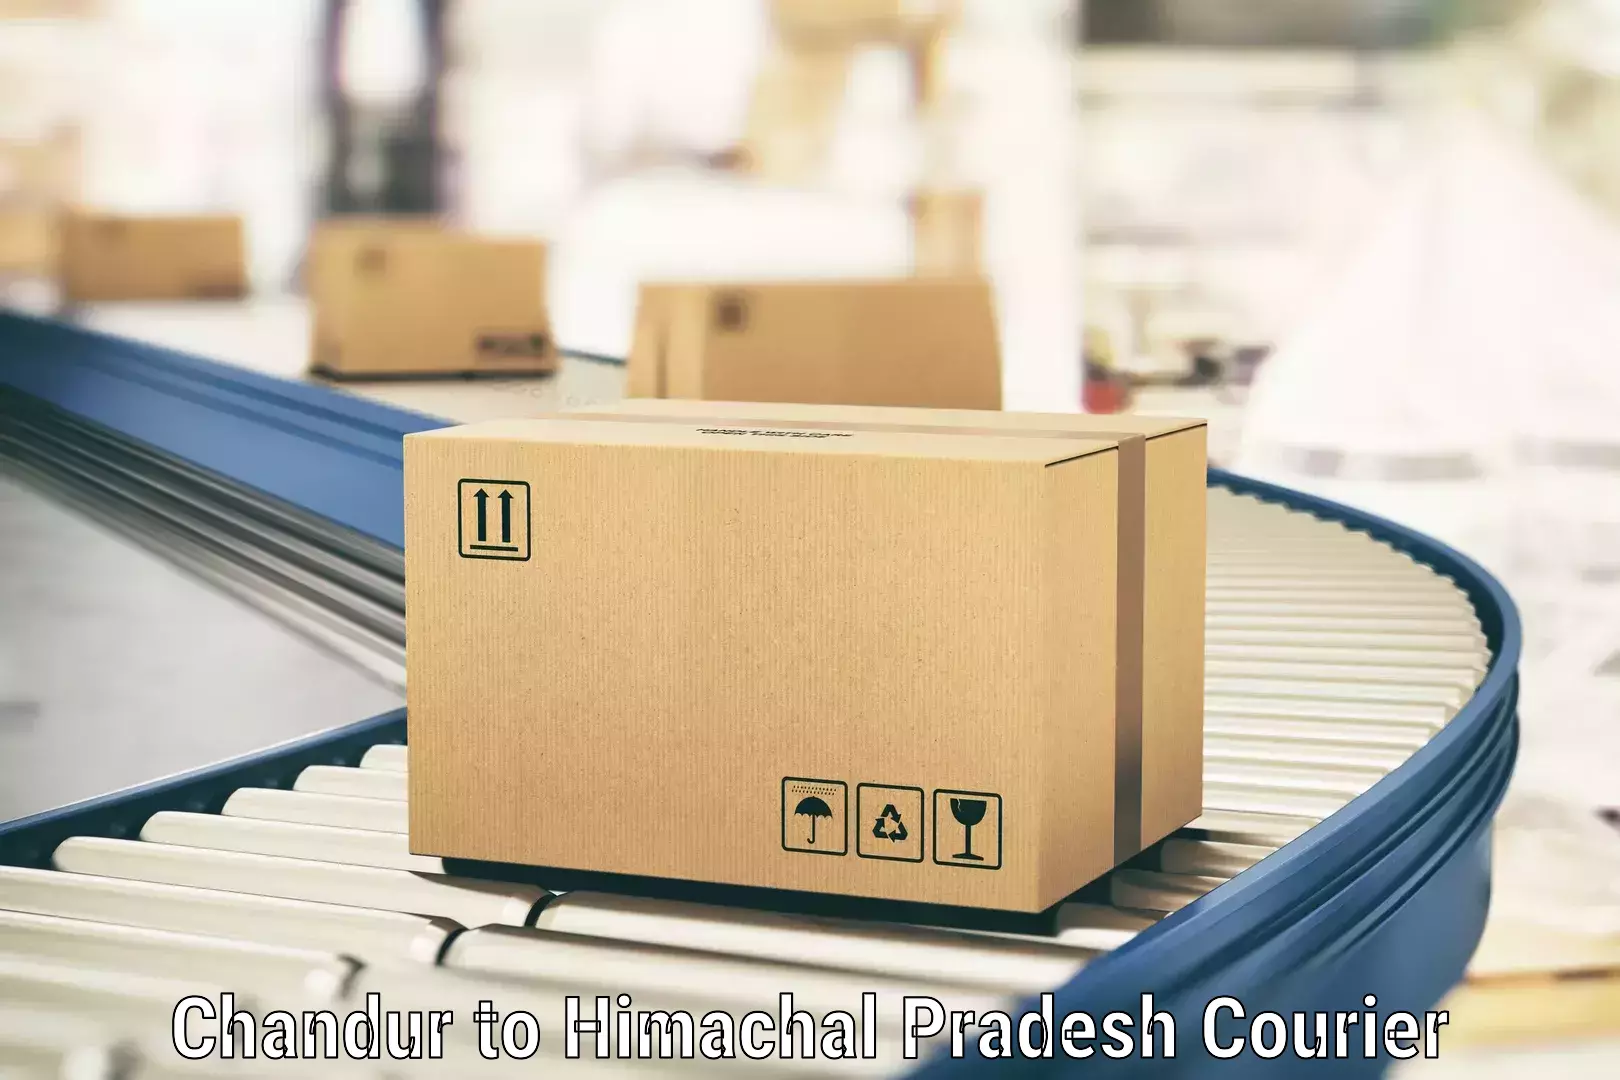 Round-the-clock parcel delivery Chandur to Sandhol